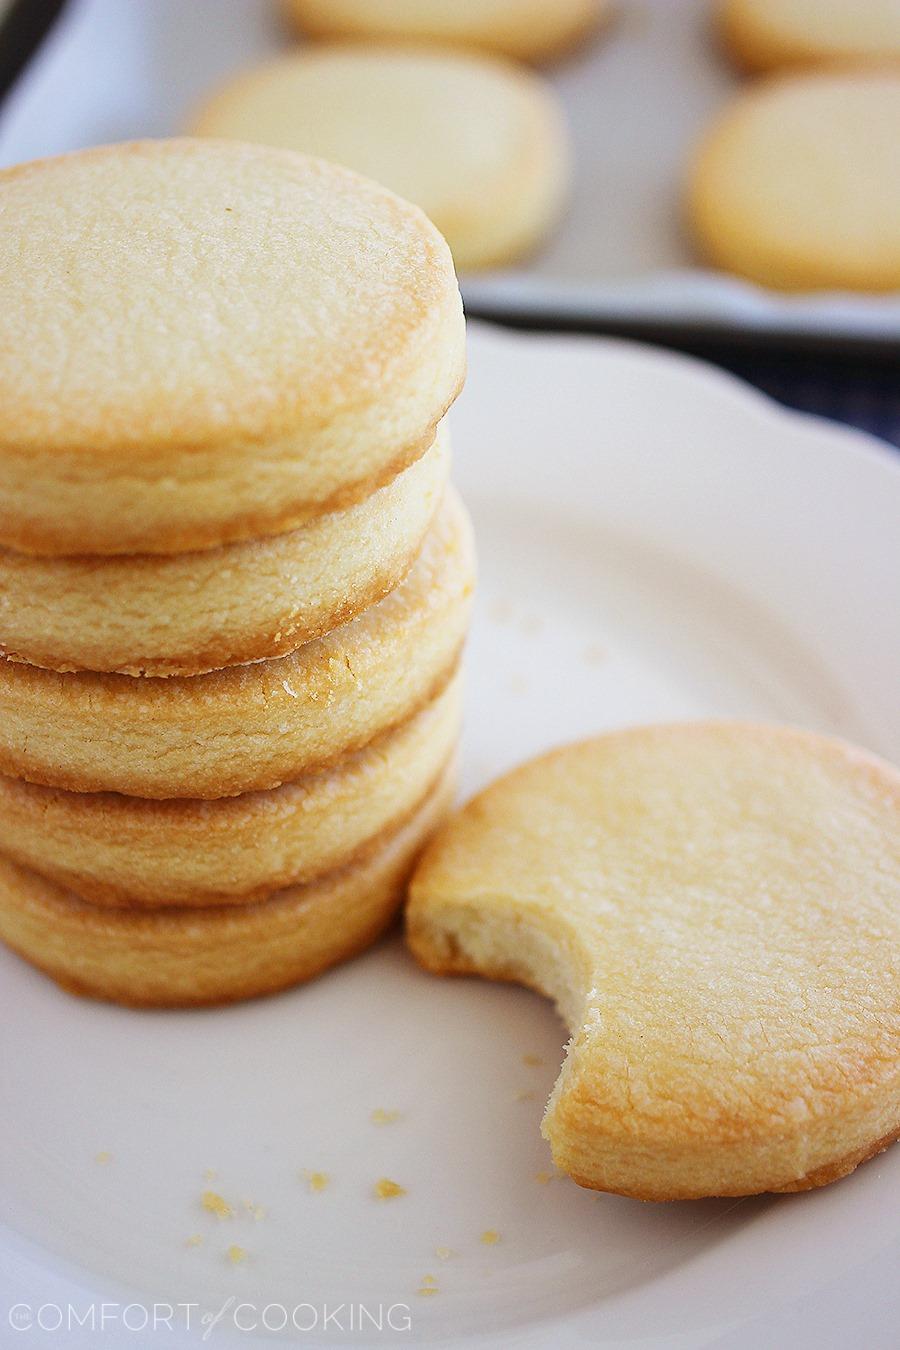 3-Ingredient Shortbread Cookies – Buttery, crumbly old fashioned shortbread cookies, just 3 ingredients and 10 minutes needed to make! | thecomfortofcooking.com